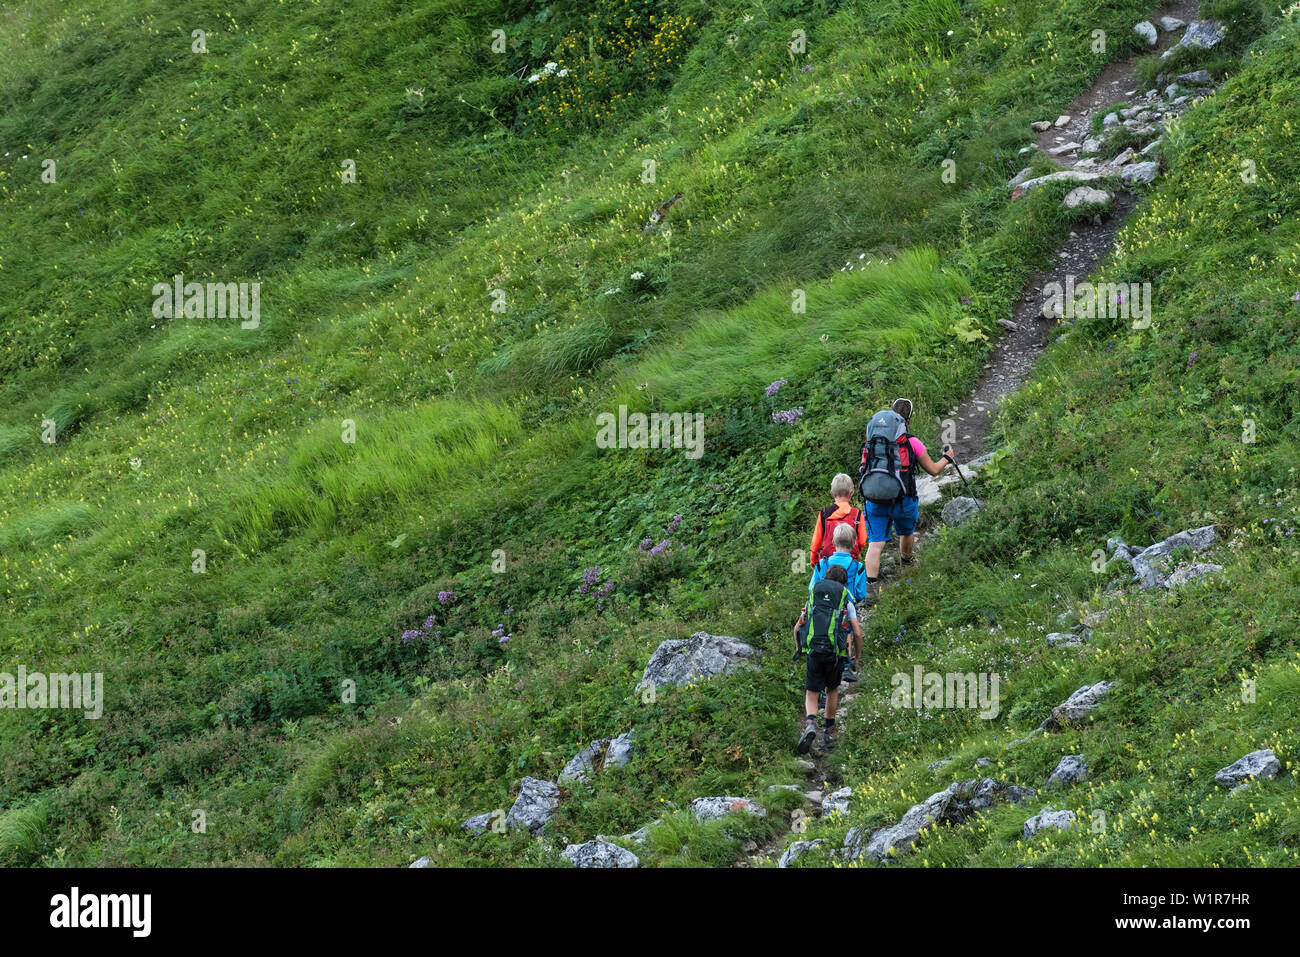 Long Distance Hiking, Mountain Landscape, Summit, Hiking Vacation, Family Vacation, Hiking, Nature, Mountain Tour, Summer Meadow, Flower Meadow, Alpin Stock Photo